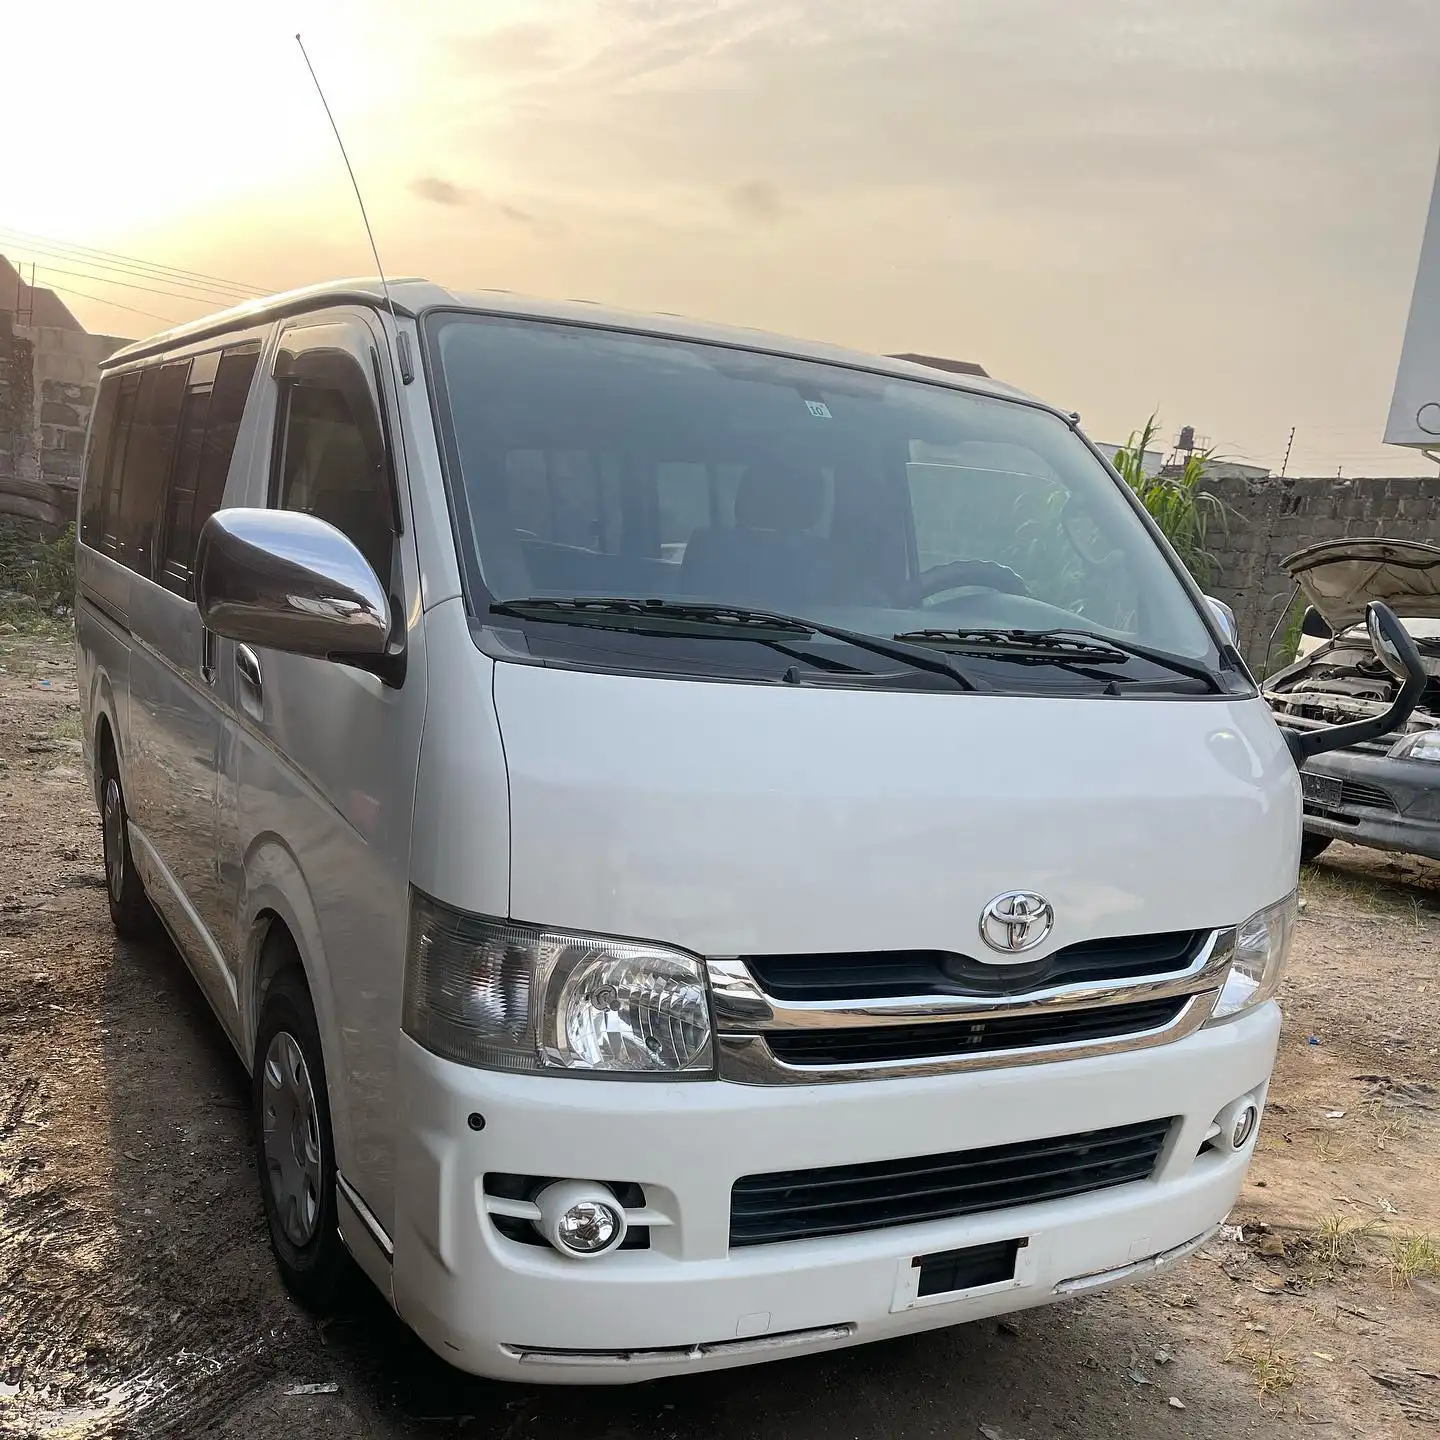 FAIRLY USED CARS/2014 2020 Toyota transporter BUS